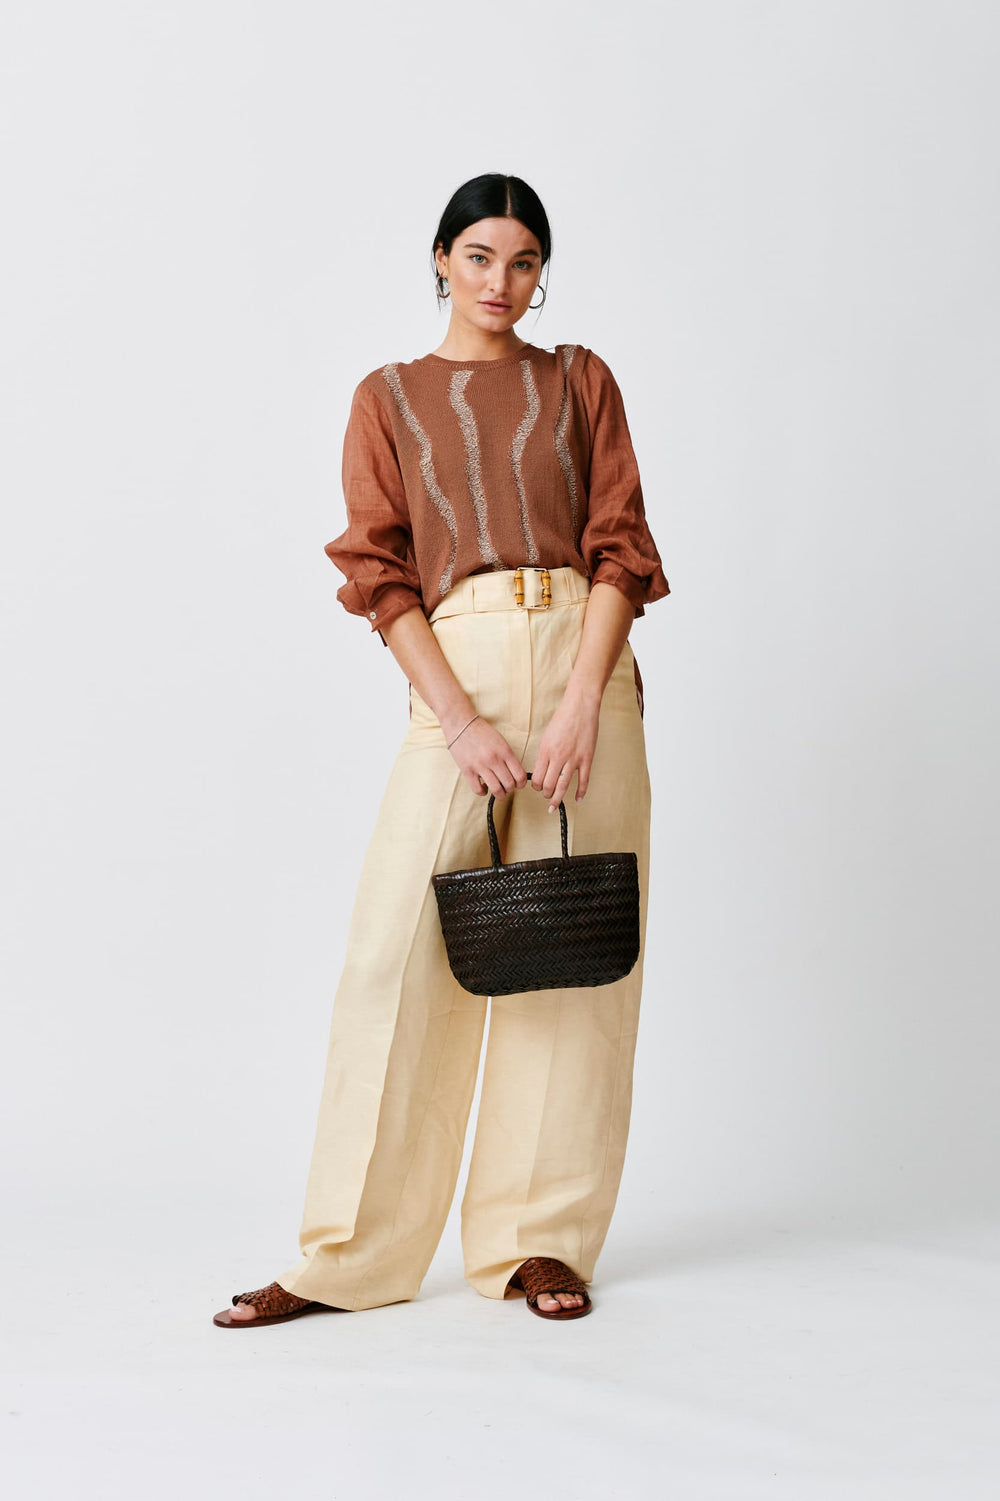 Harvey Nichols - Dragon Diffusion's woven bag is best worn with earthy  tones on sweet Saturday afternoons, just like Monikh.